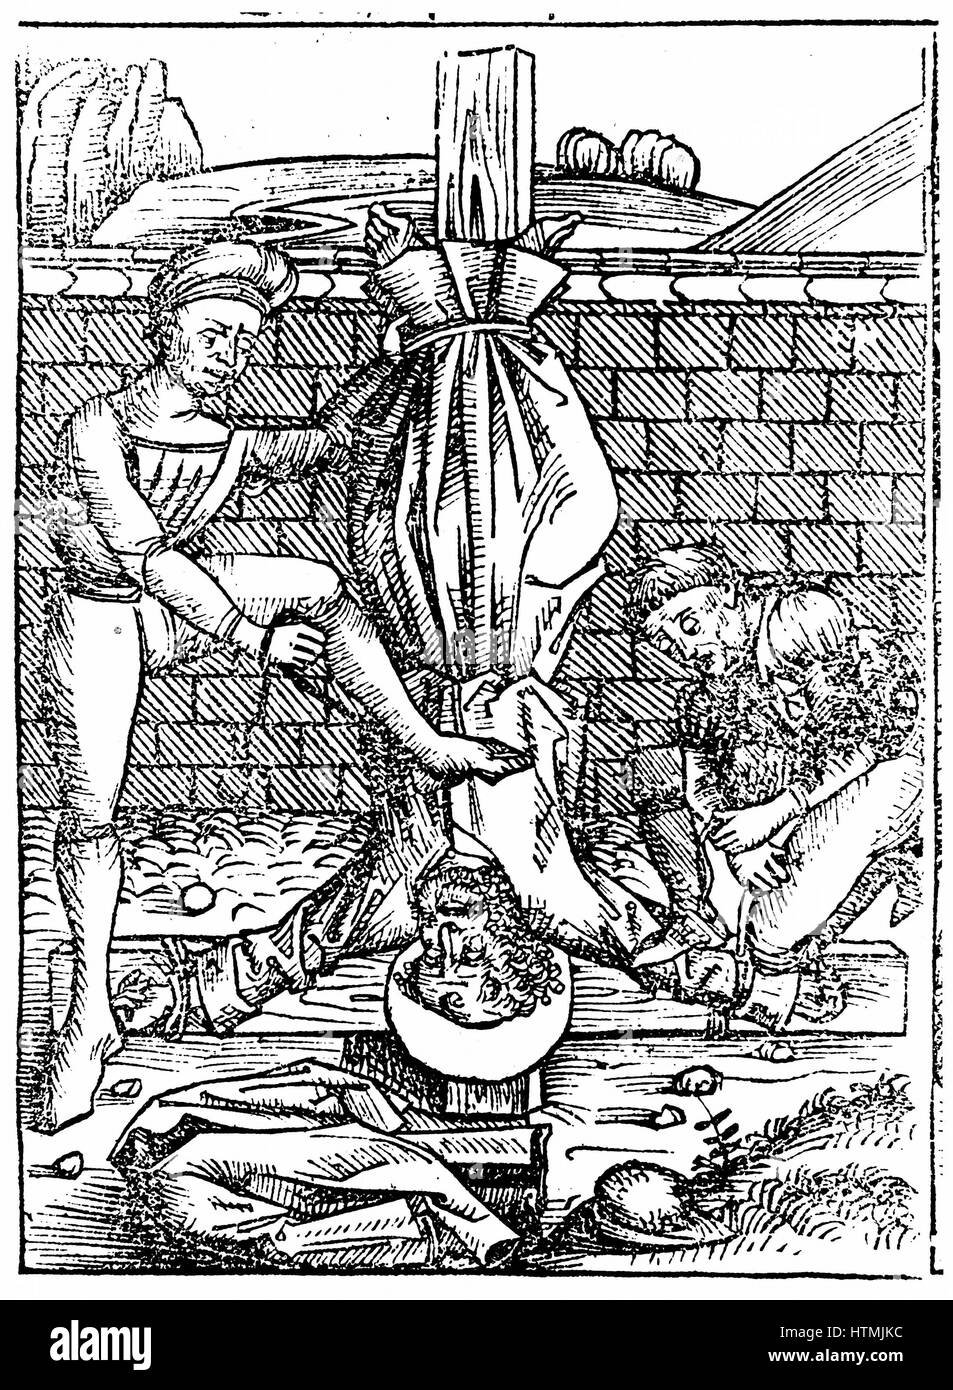 Martyrdom of St Peter who is said to have been crucified at Rome with head, not feet, nearest the ground. From Hartmann Schedel 'Liber chronicarum mundi' (Nuremberg Chronicle) Nuremberg, 1495. Woodcut Stock Photo